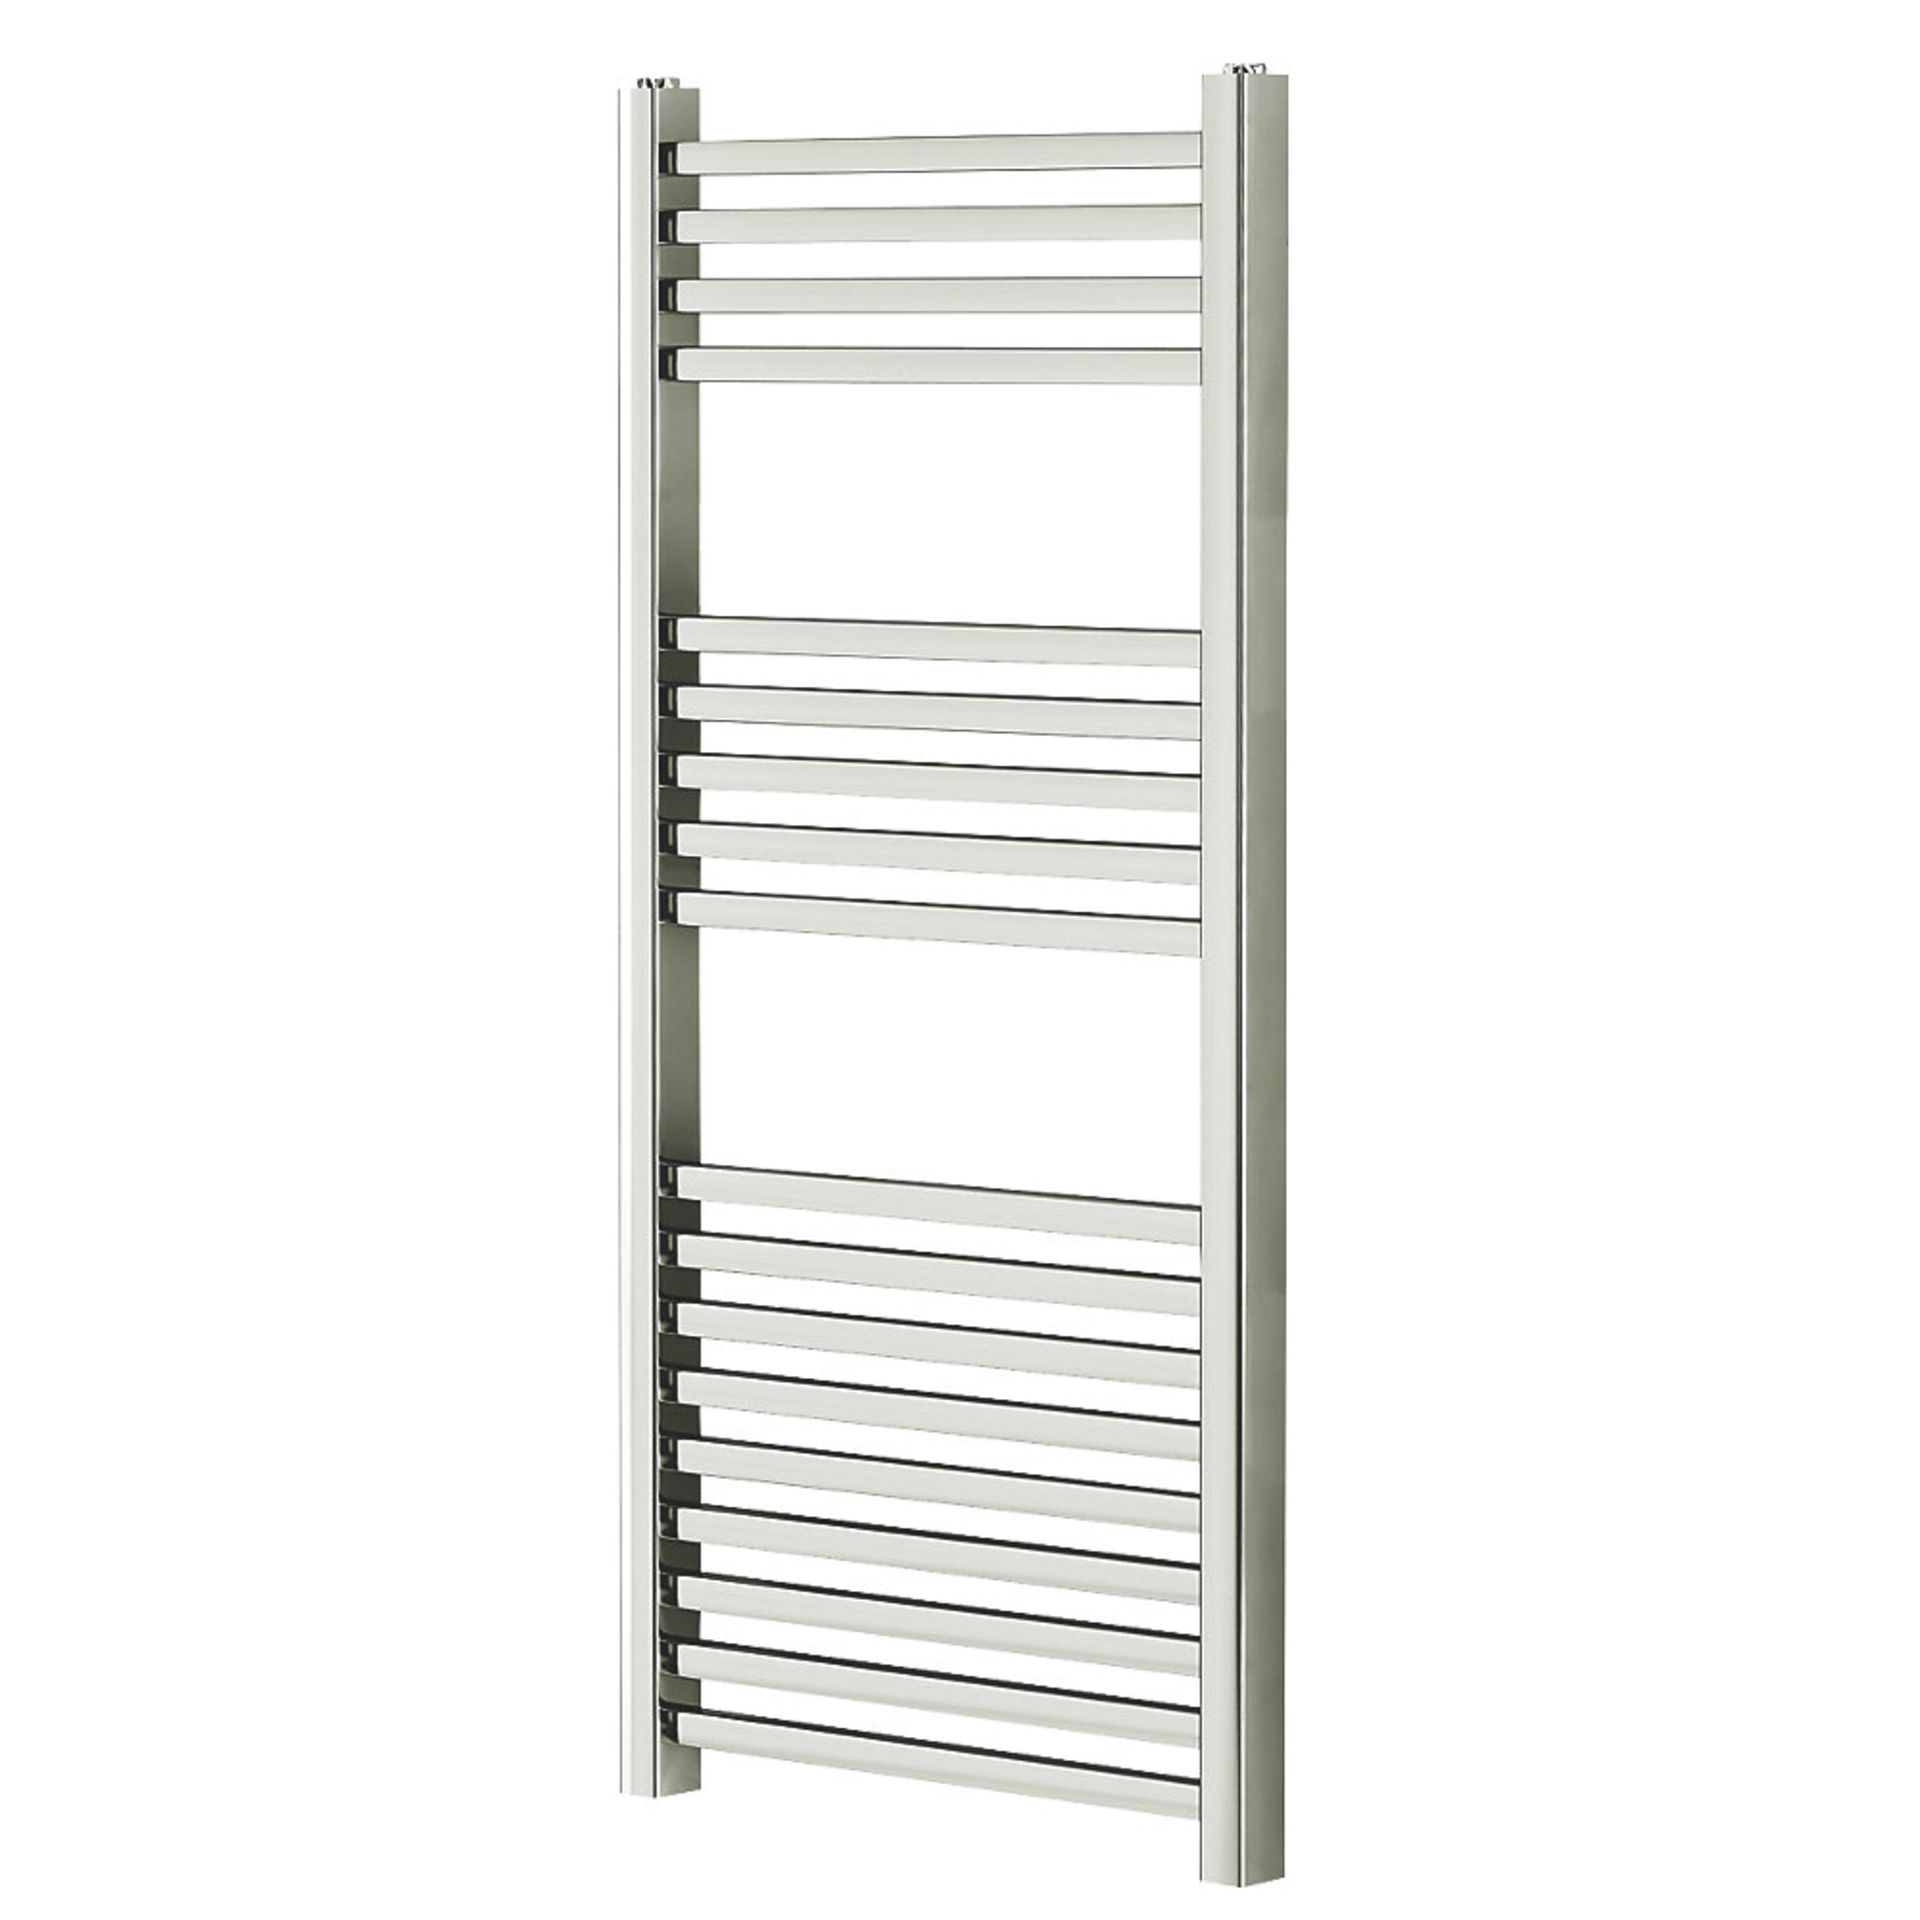 (EY159) 974 x 450mm Chrome Towel Warmer. Mild steel construction with a chrome-plated finish. Flat